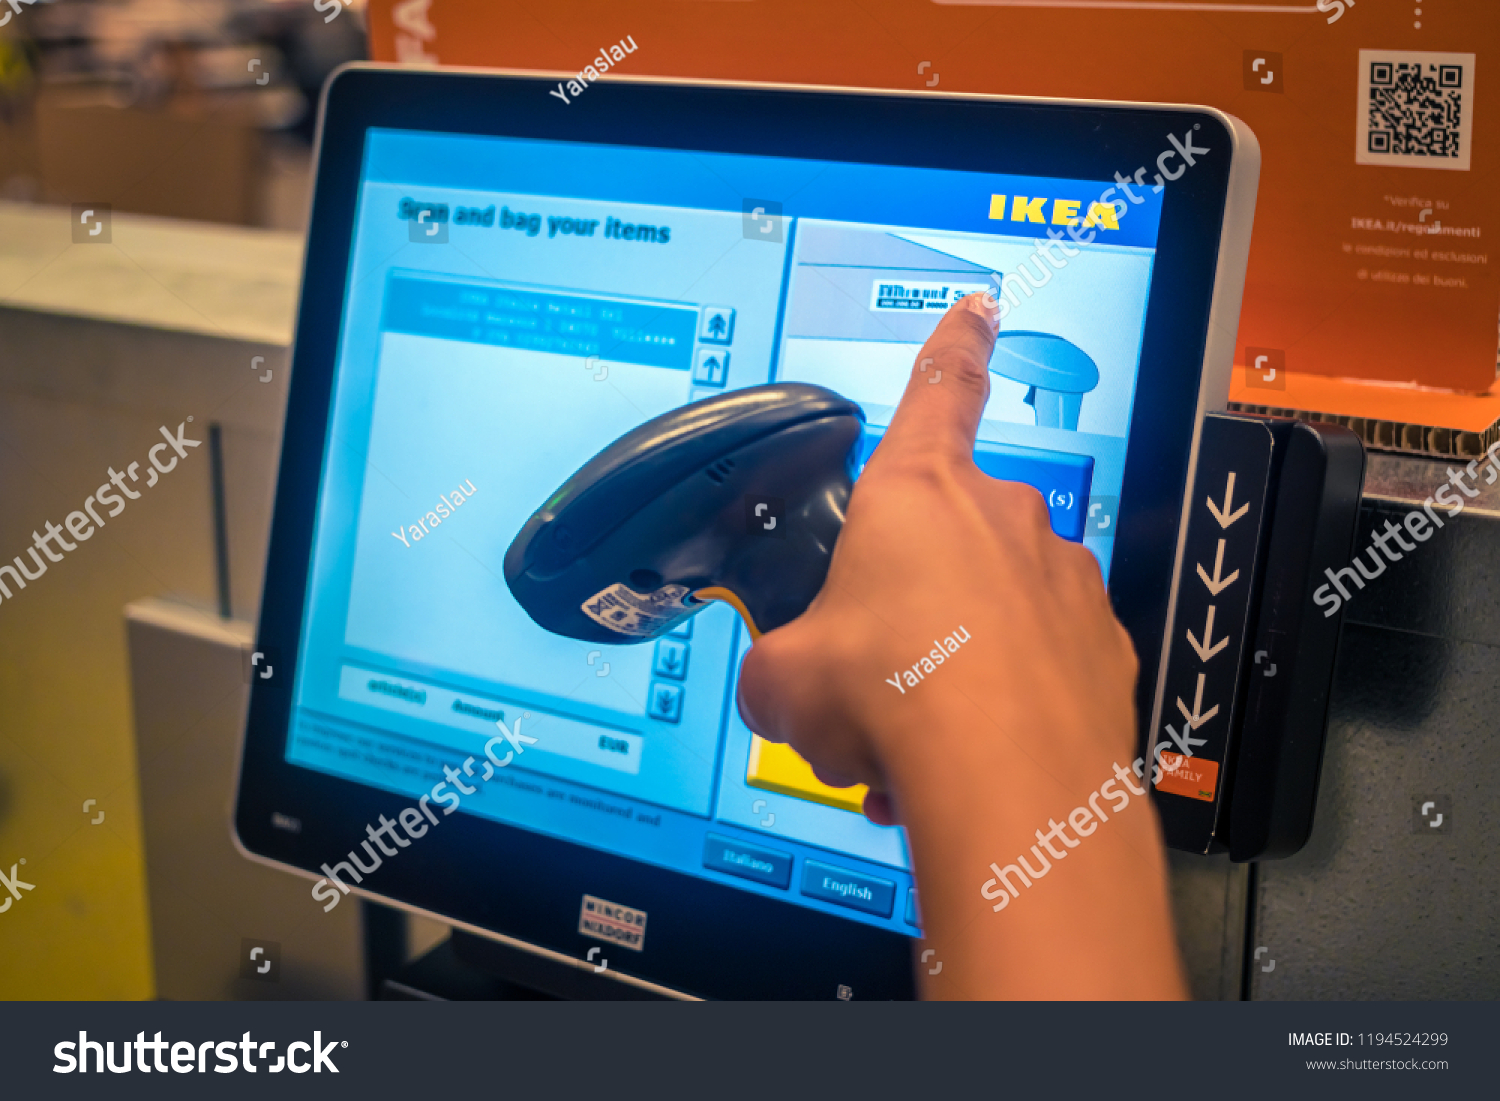 Gorizia, Italy, August 11, 2018: Ikea store, self-service scanner at the cash register, finger points to the price #1194524299